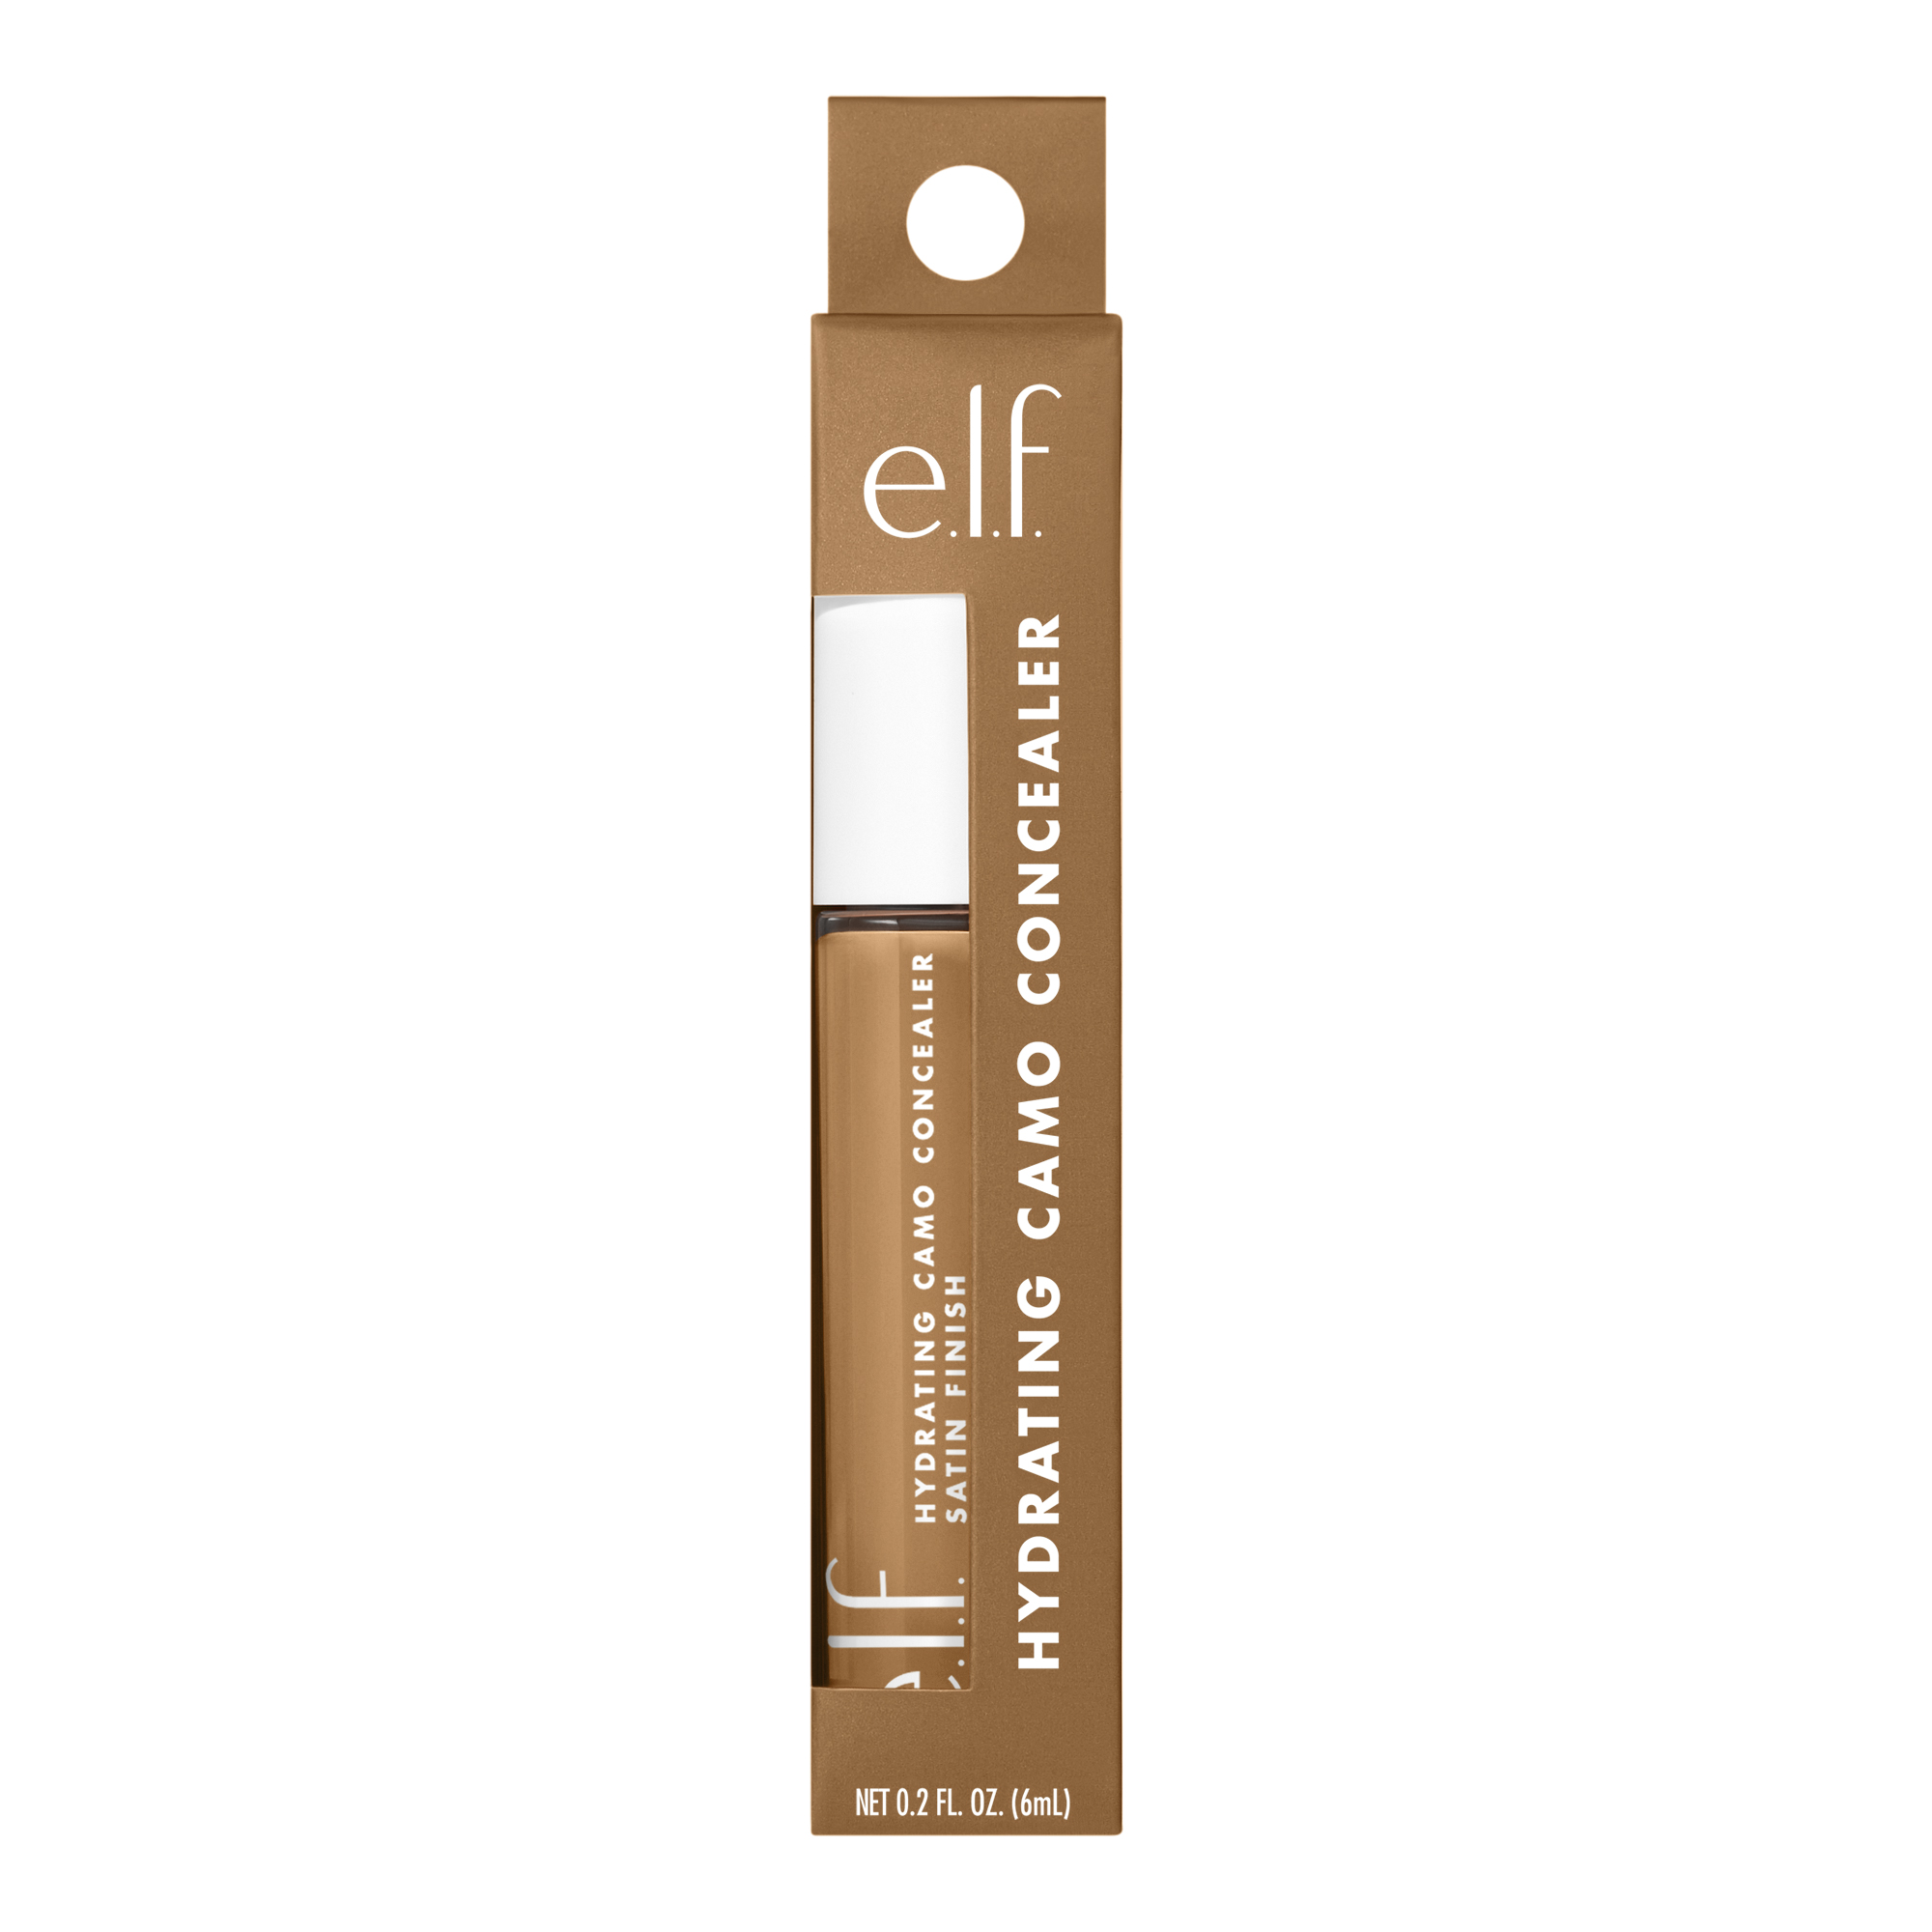 e.l.f. Hydrating Camo Concealer, Tan Sand - image 5 of 7